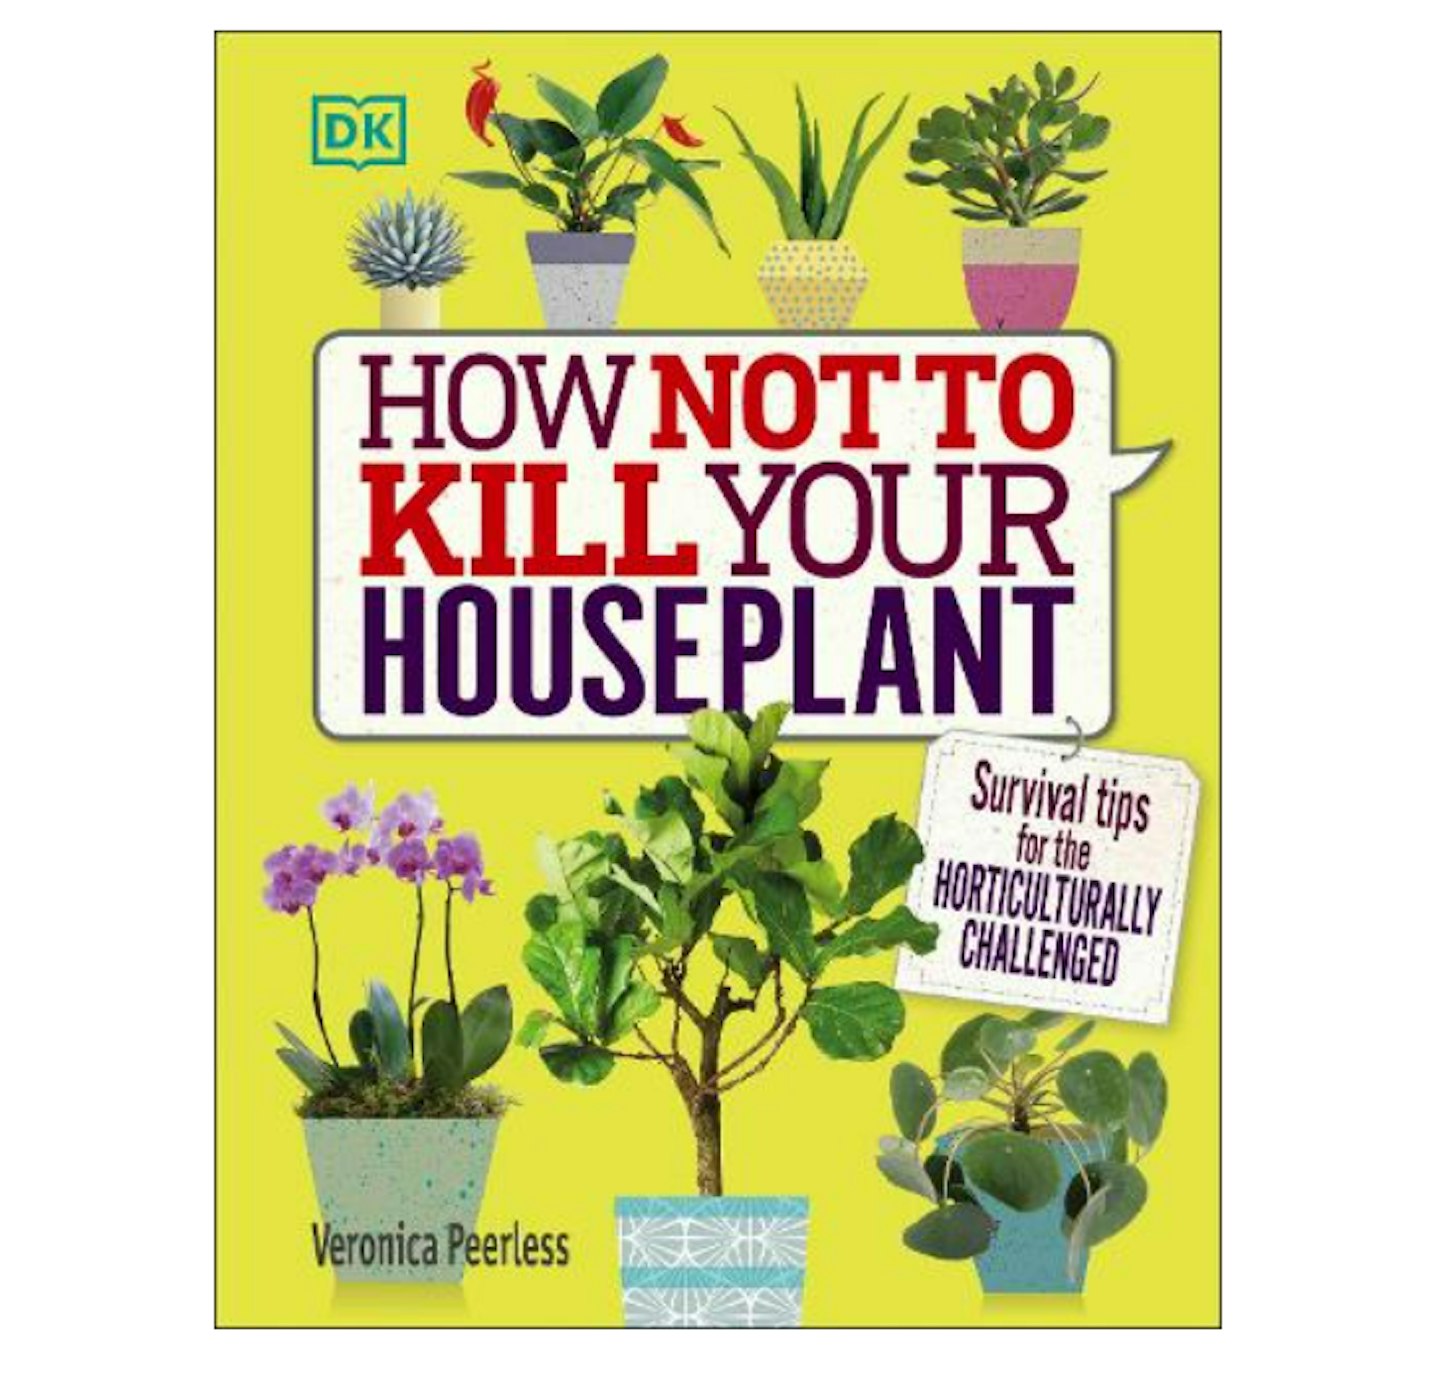 How Not to Kill Your Houseplant: Survival Tips for the Horticulturally Challenged (Hardback)